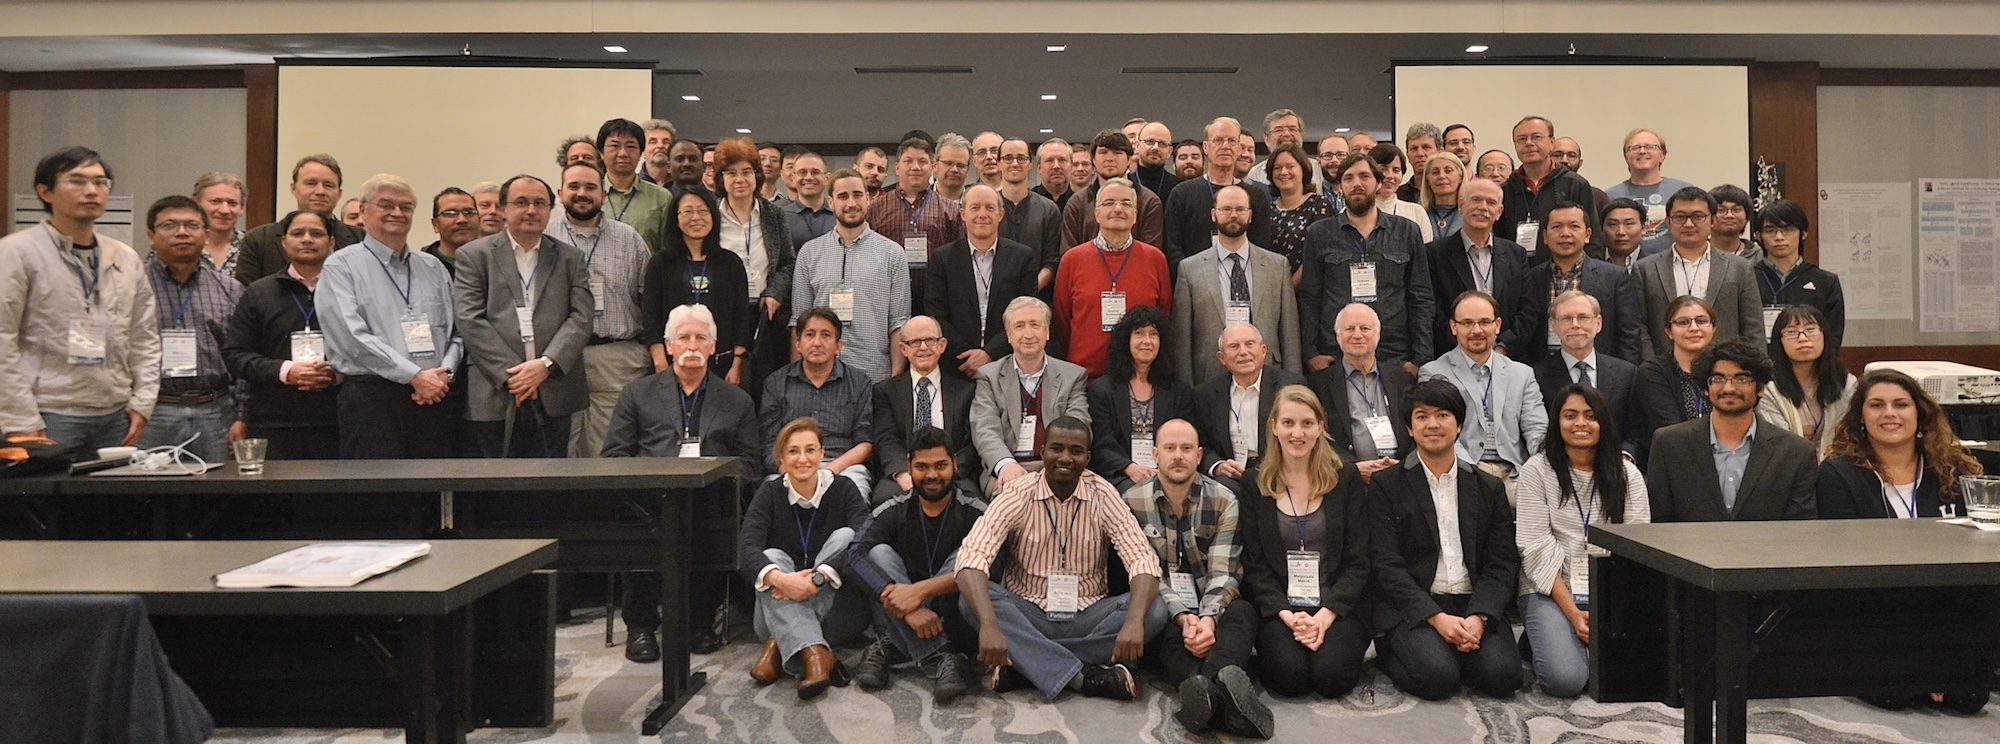 2018 ASMD Conference Photo